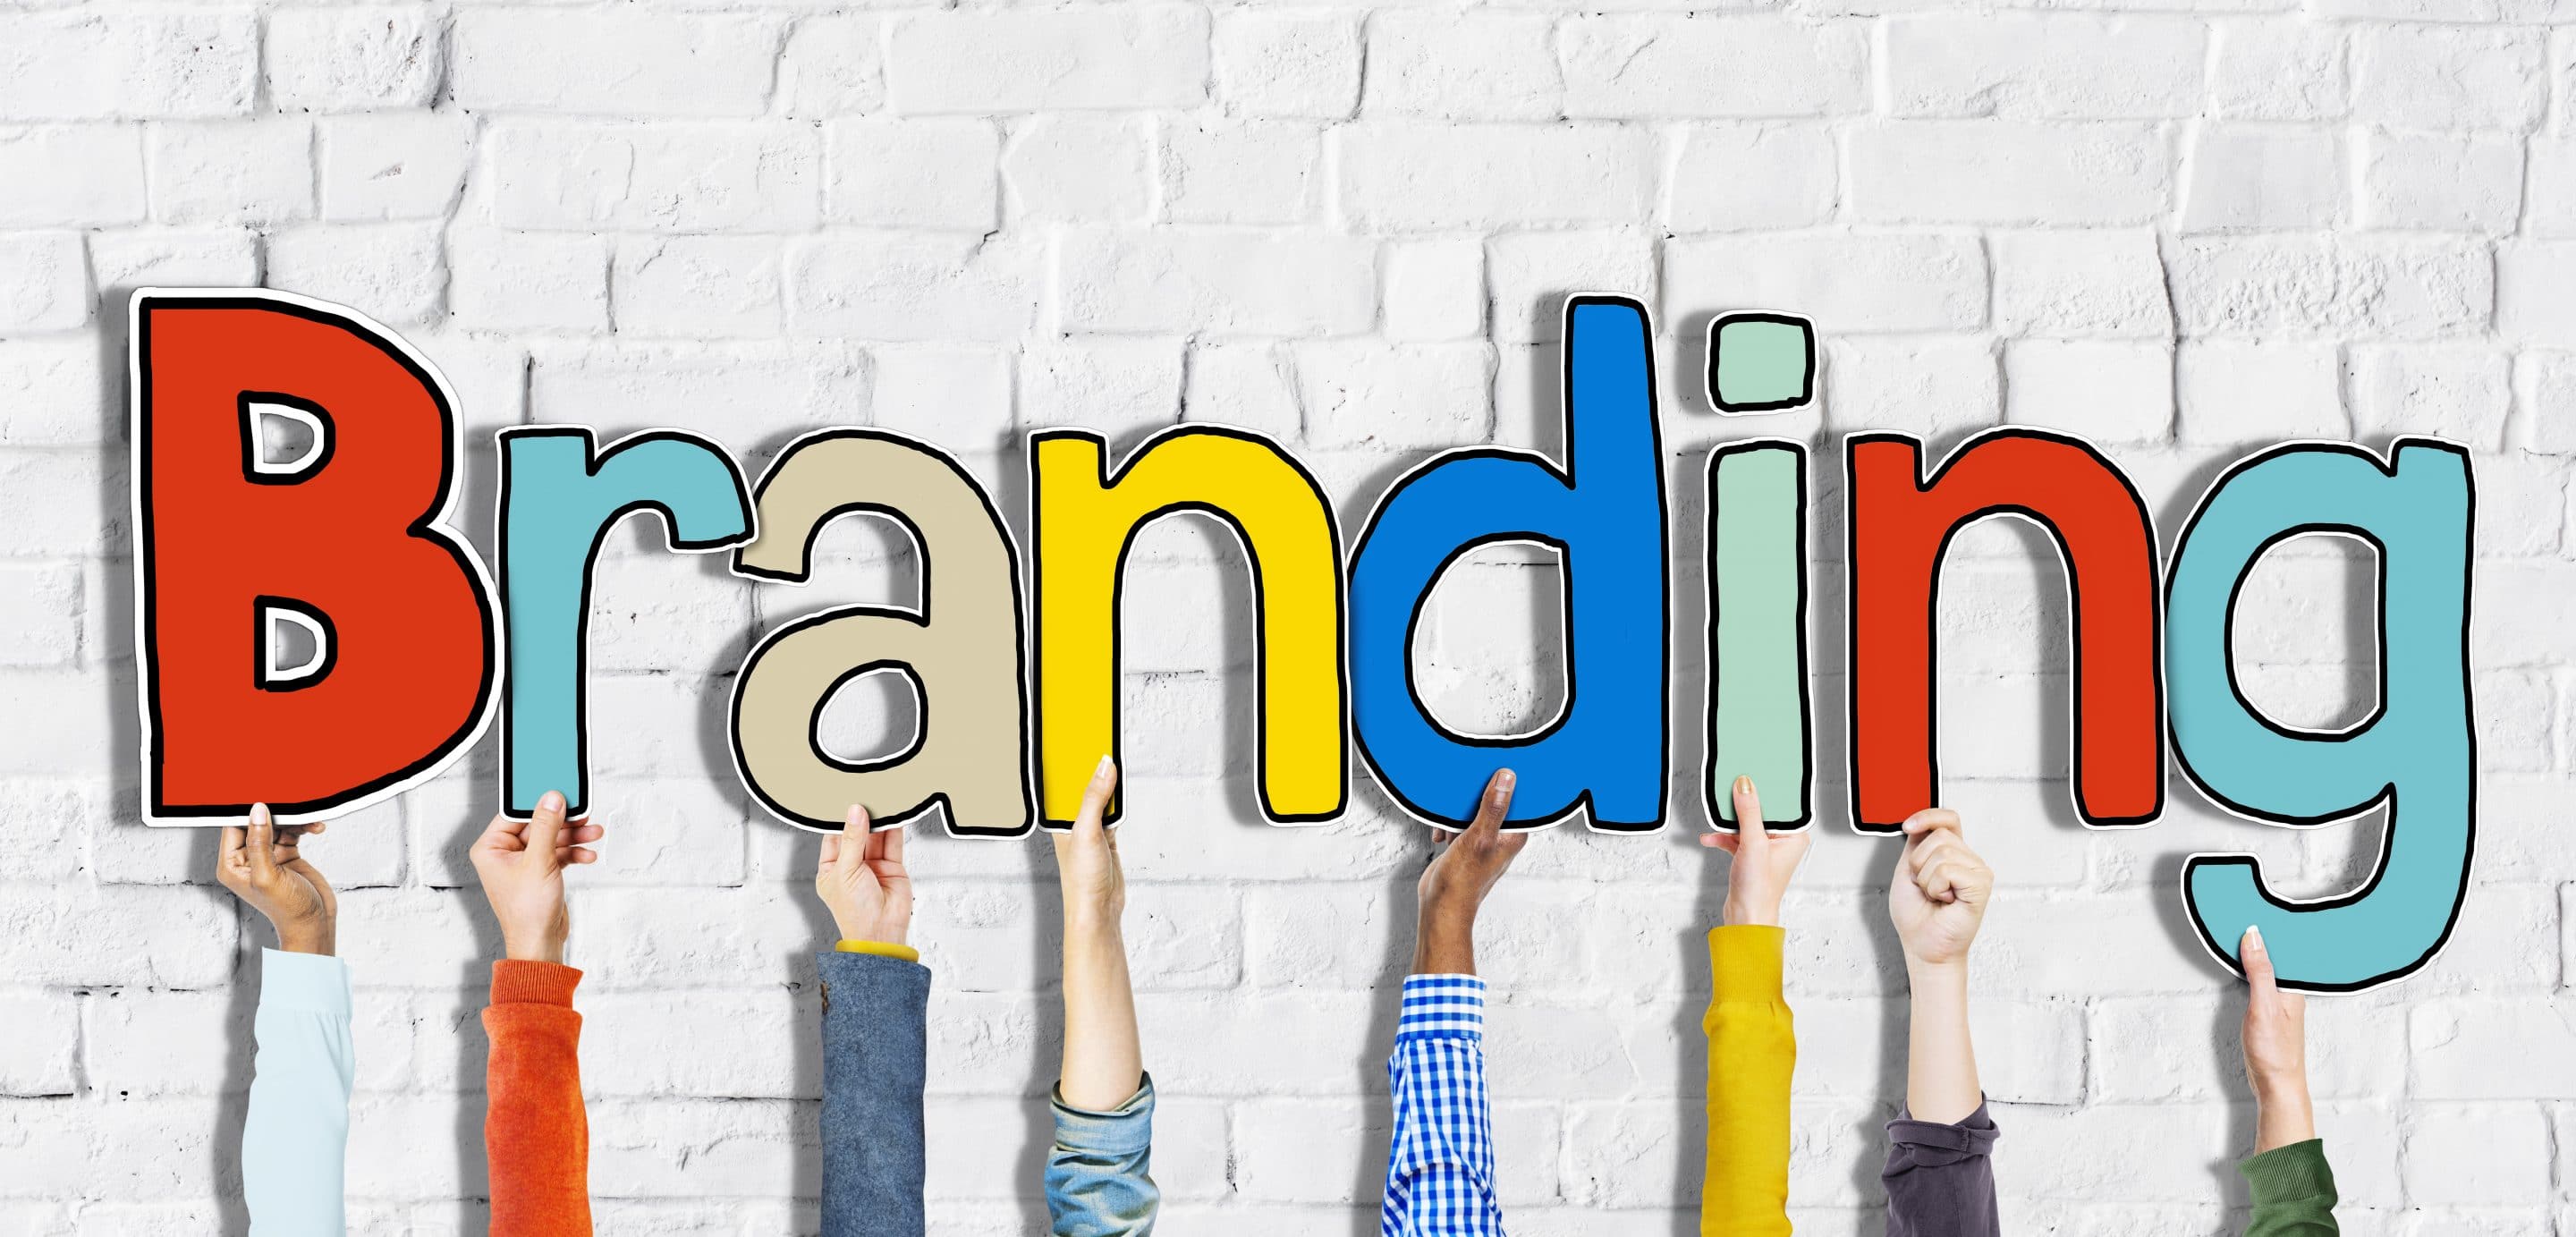 3 Lessons on Brand-Building From Successful Companies